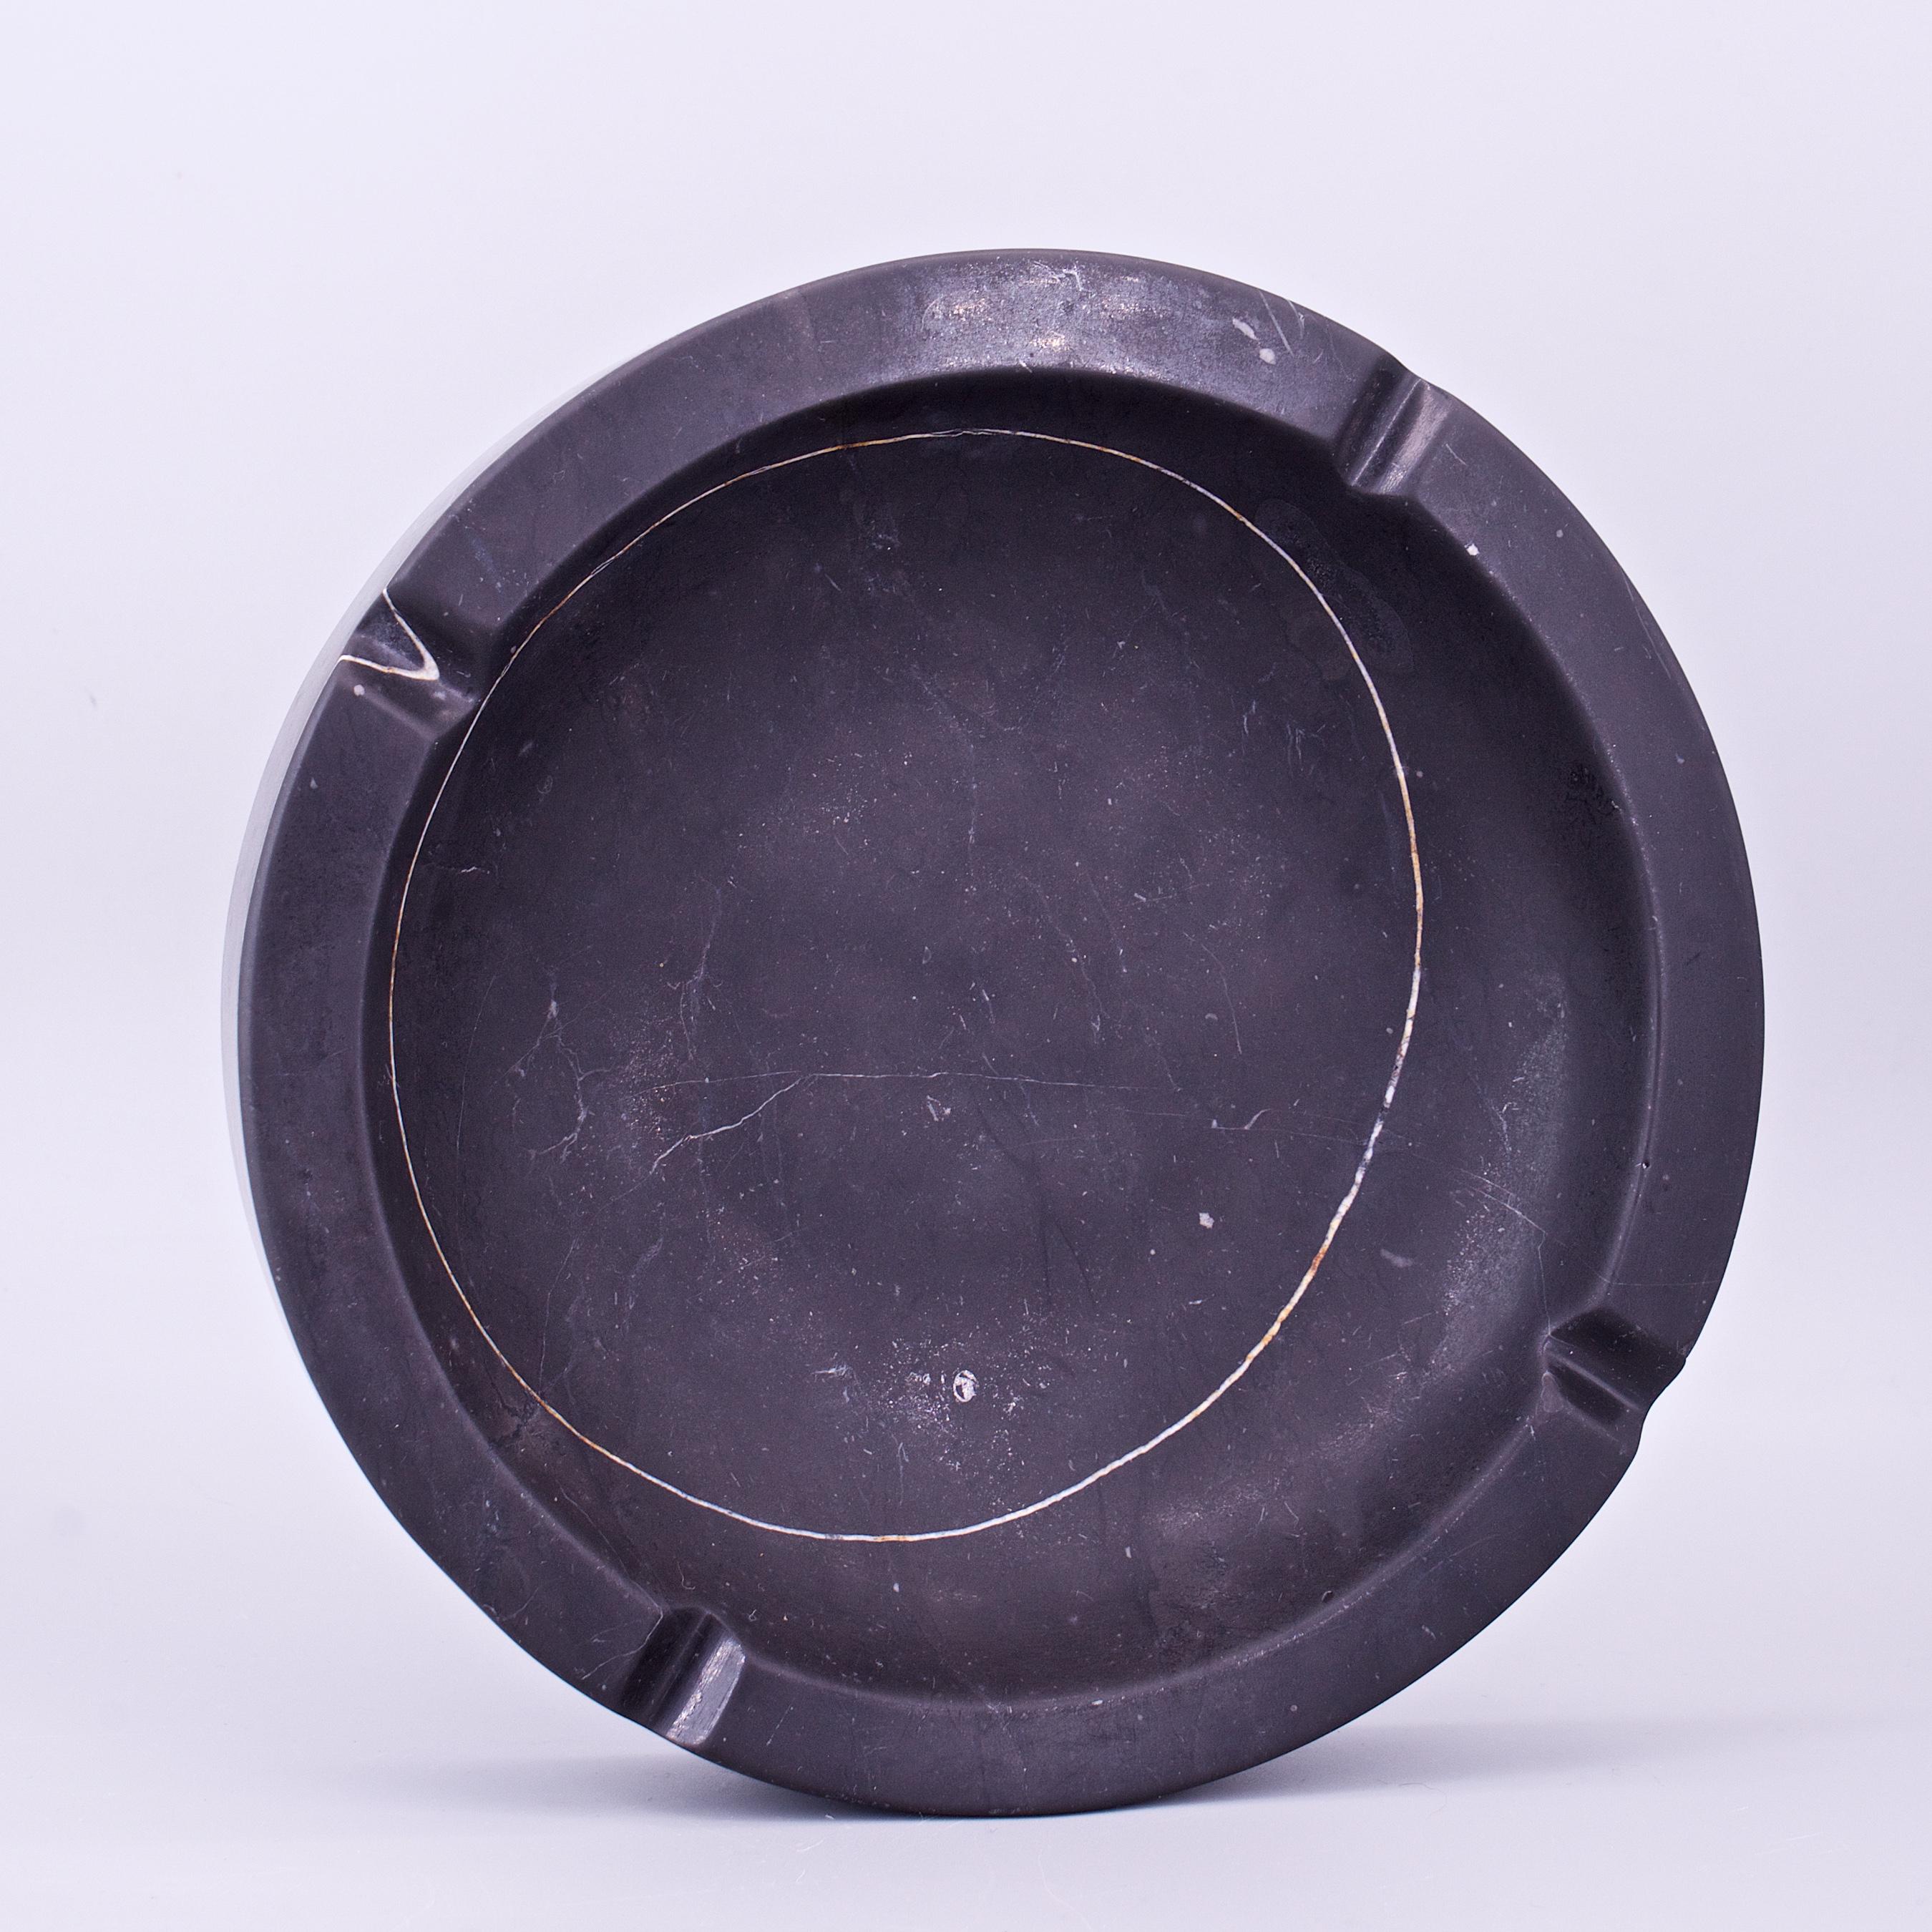 Carved out black marble ashtray, revealing nicely placed circular white veining. Has an imperfection / chip near one of the cigarette notches, shown in image 3, bottom left notch.